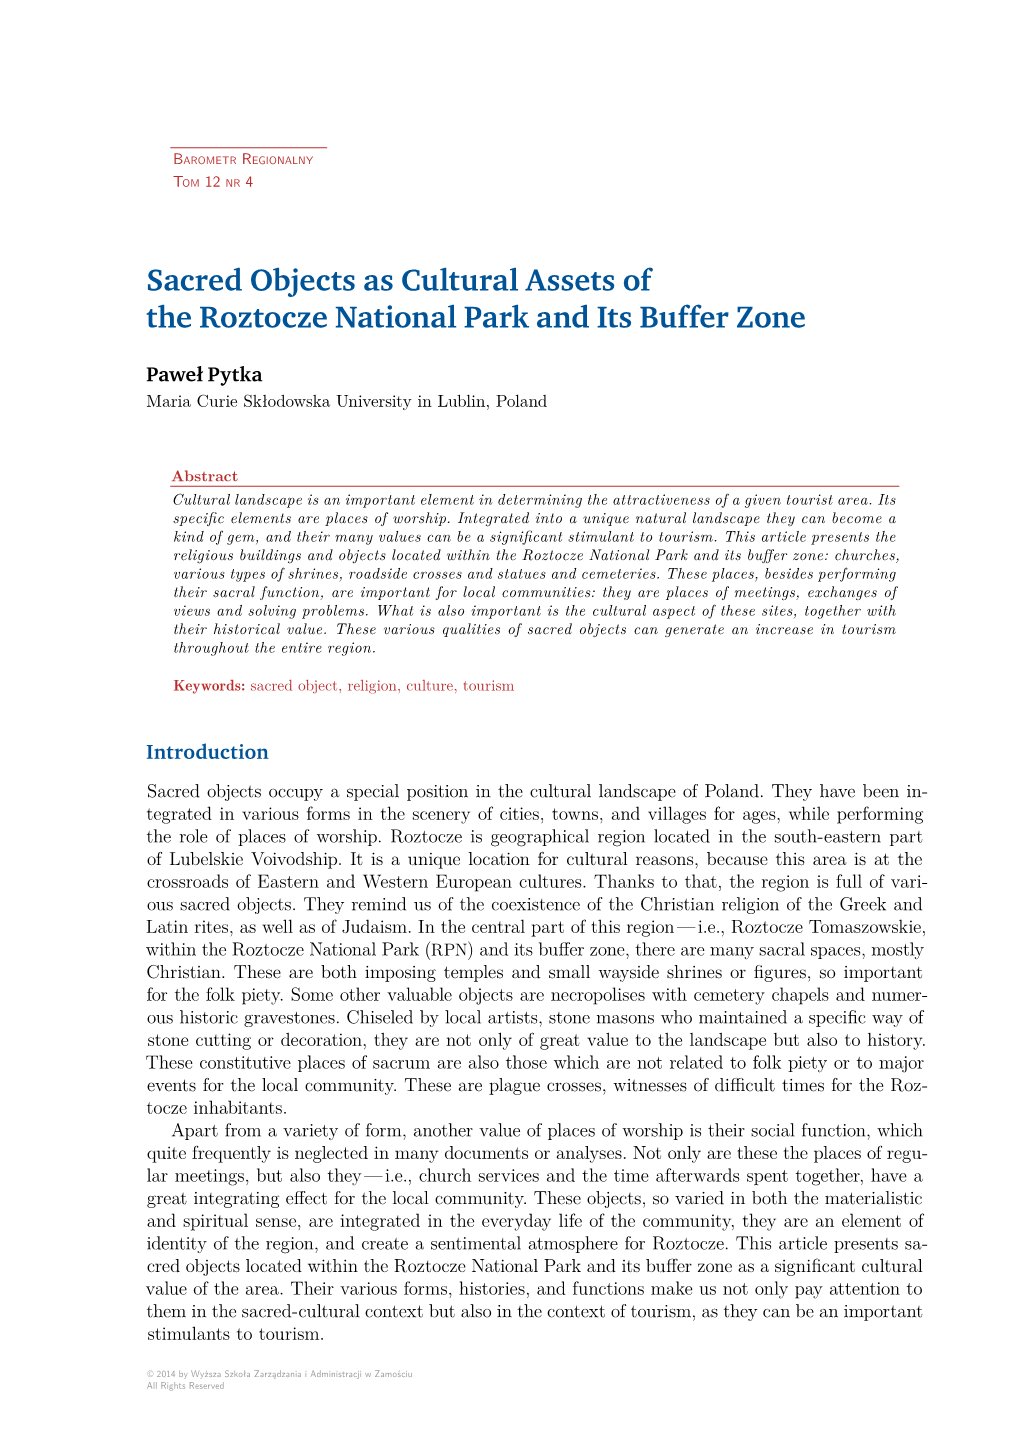 Sacred Objects As Cultural Assets of the Roztocze National Park and Its Buffer Zone